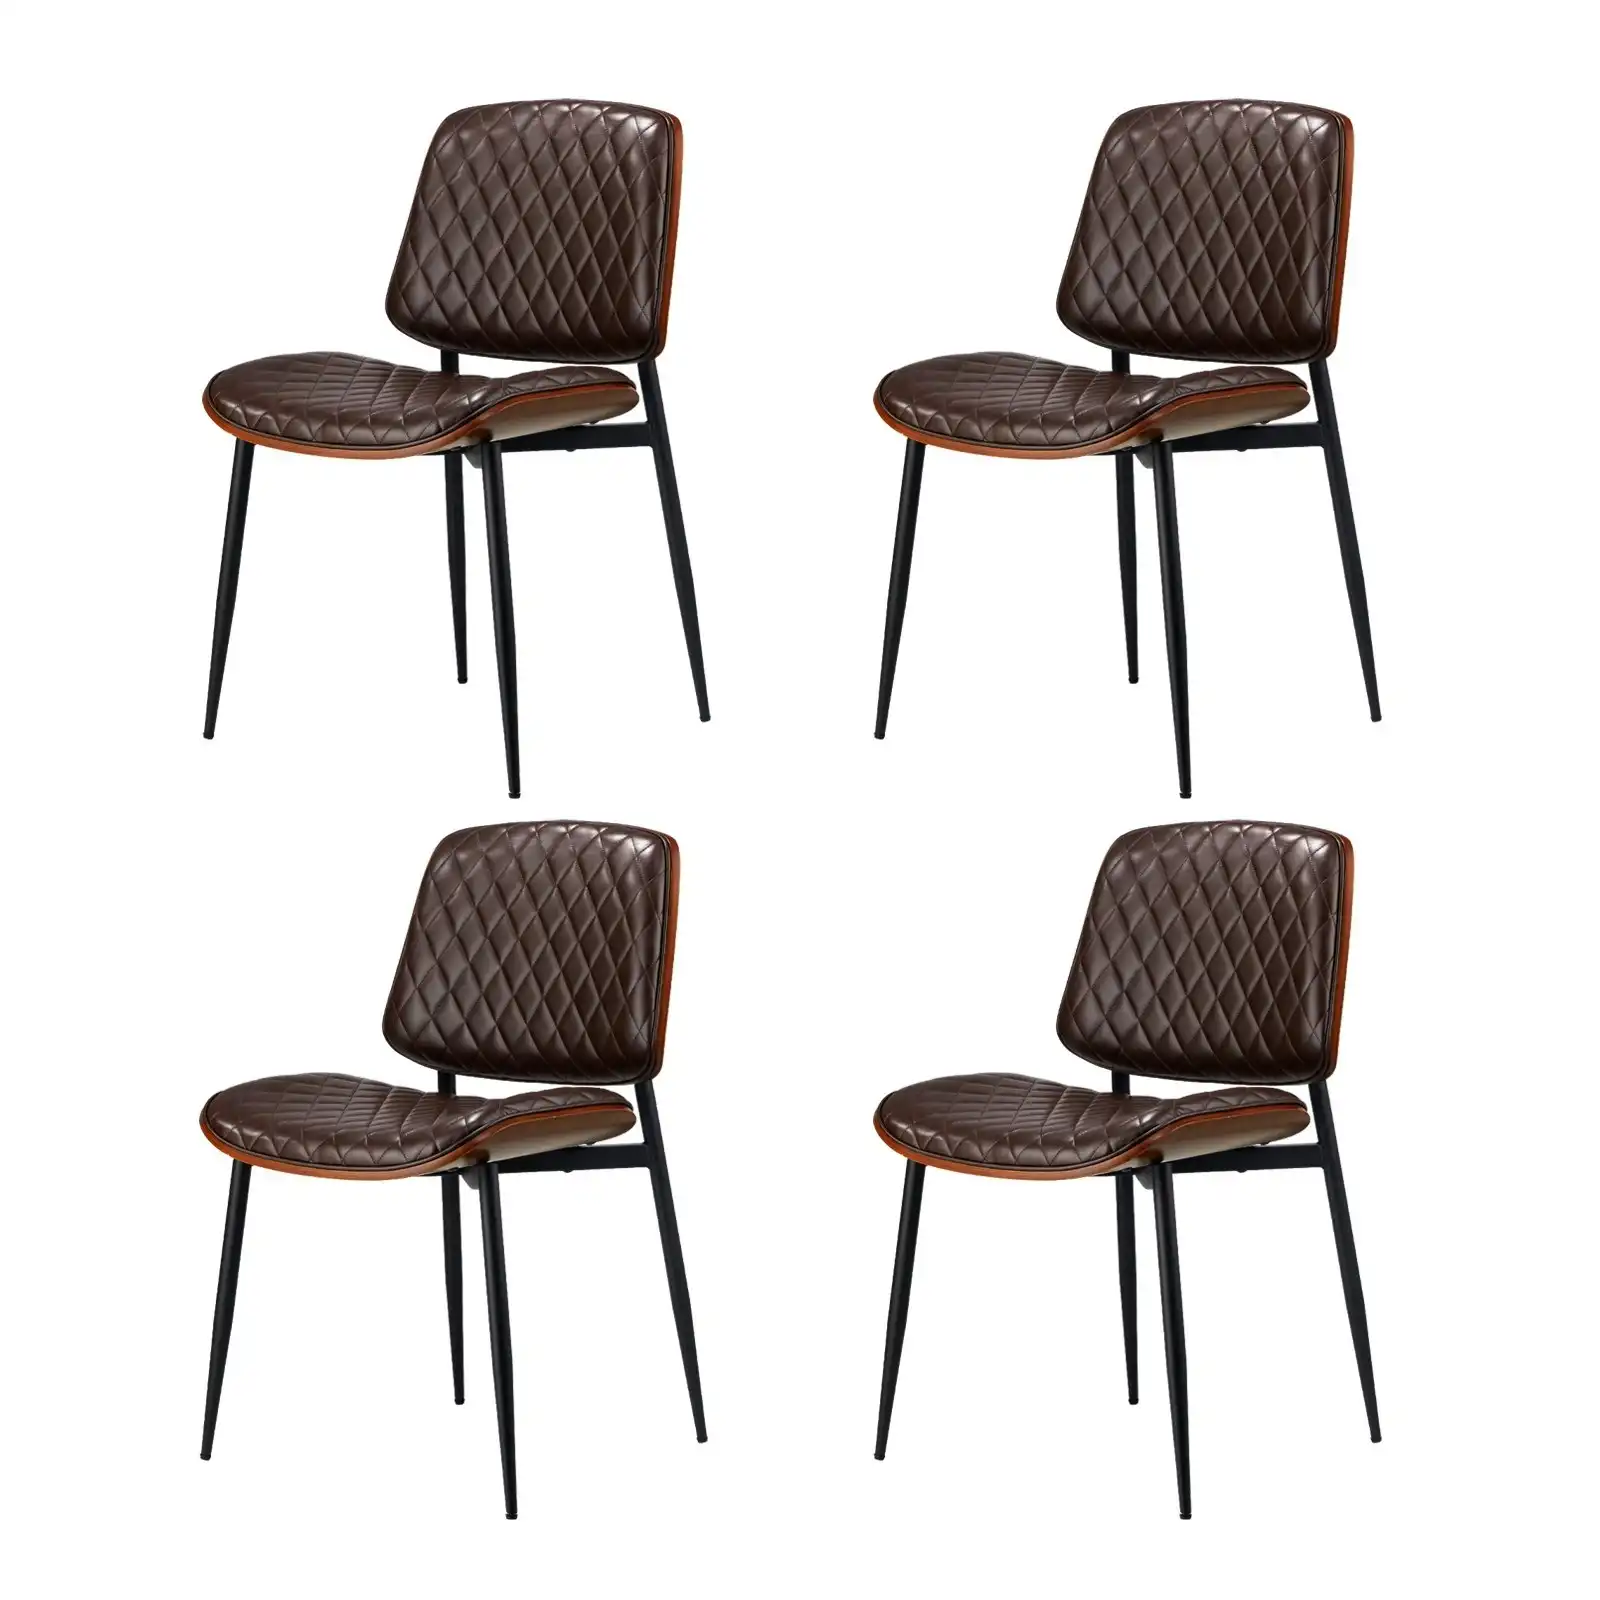 Oikiture 4x Dining Chairs Retro Faux Leather Solid Beech Wood Metal Legs Walnut